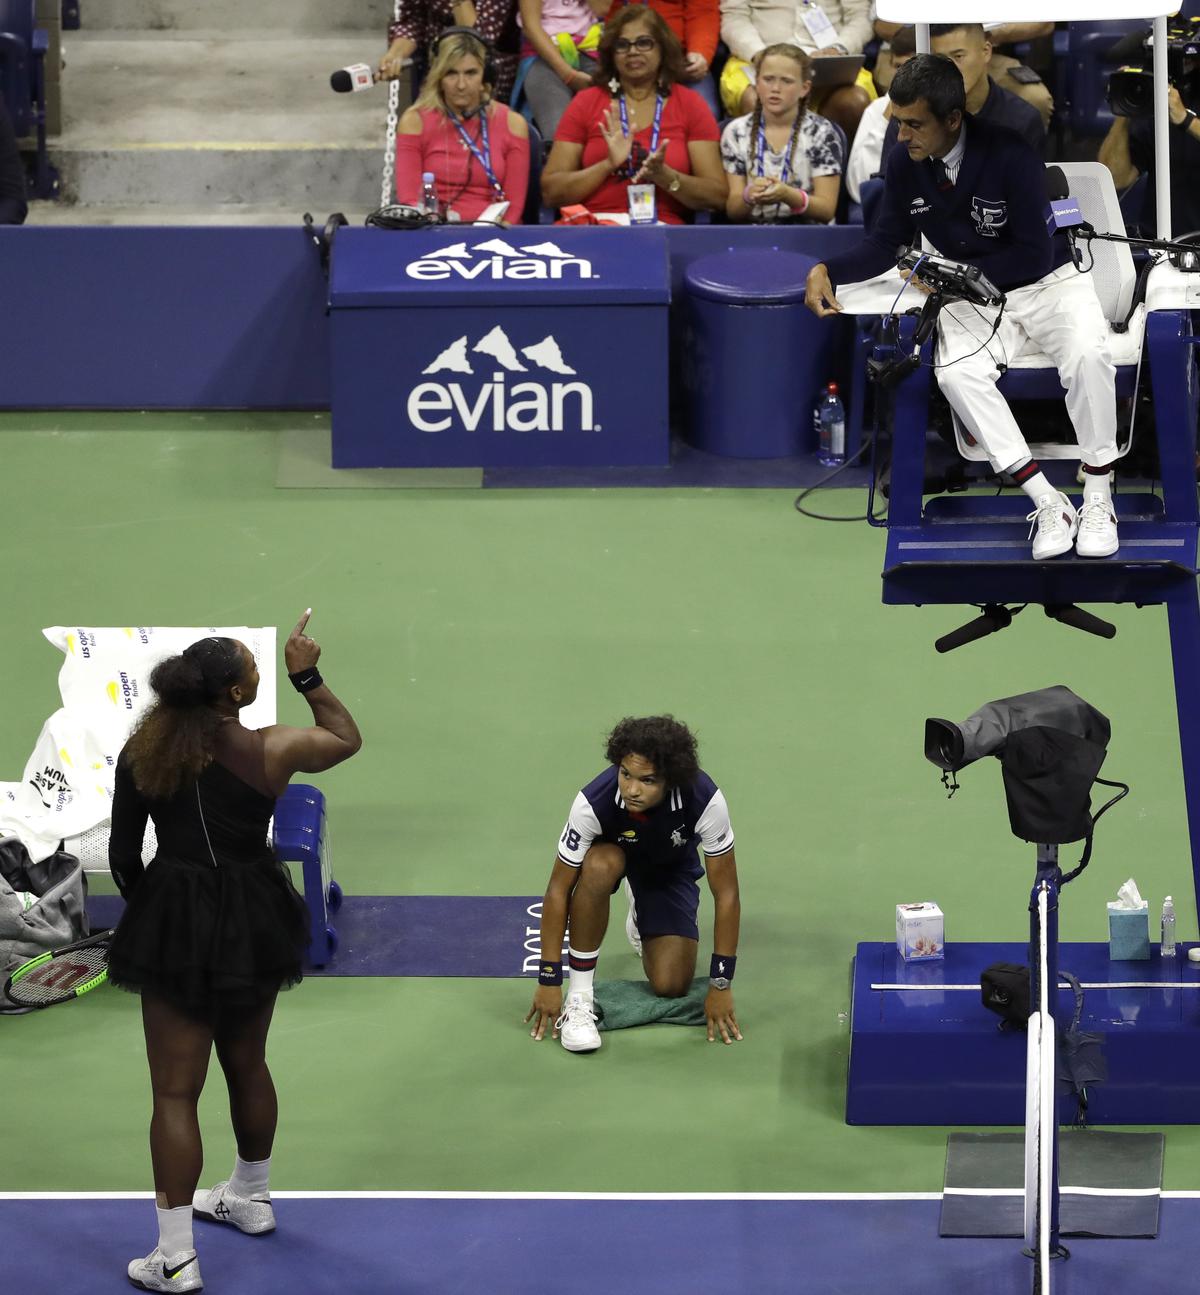 Serena Williams argues with the chair umpire during the women’s final of the U.S. Open tennis tournament against Naomi Osaka.